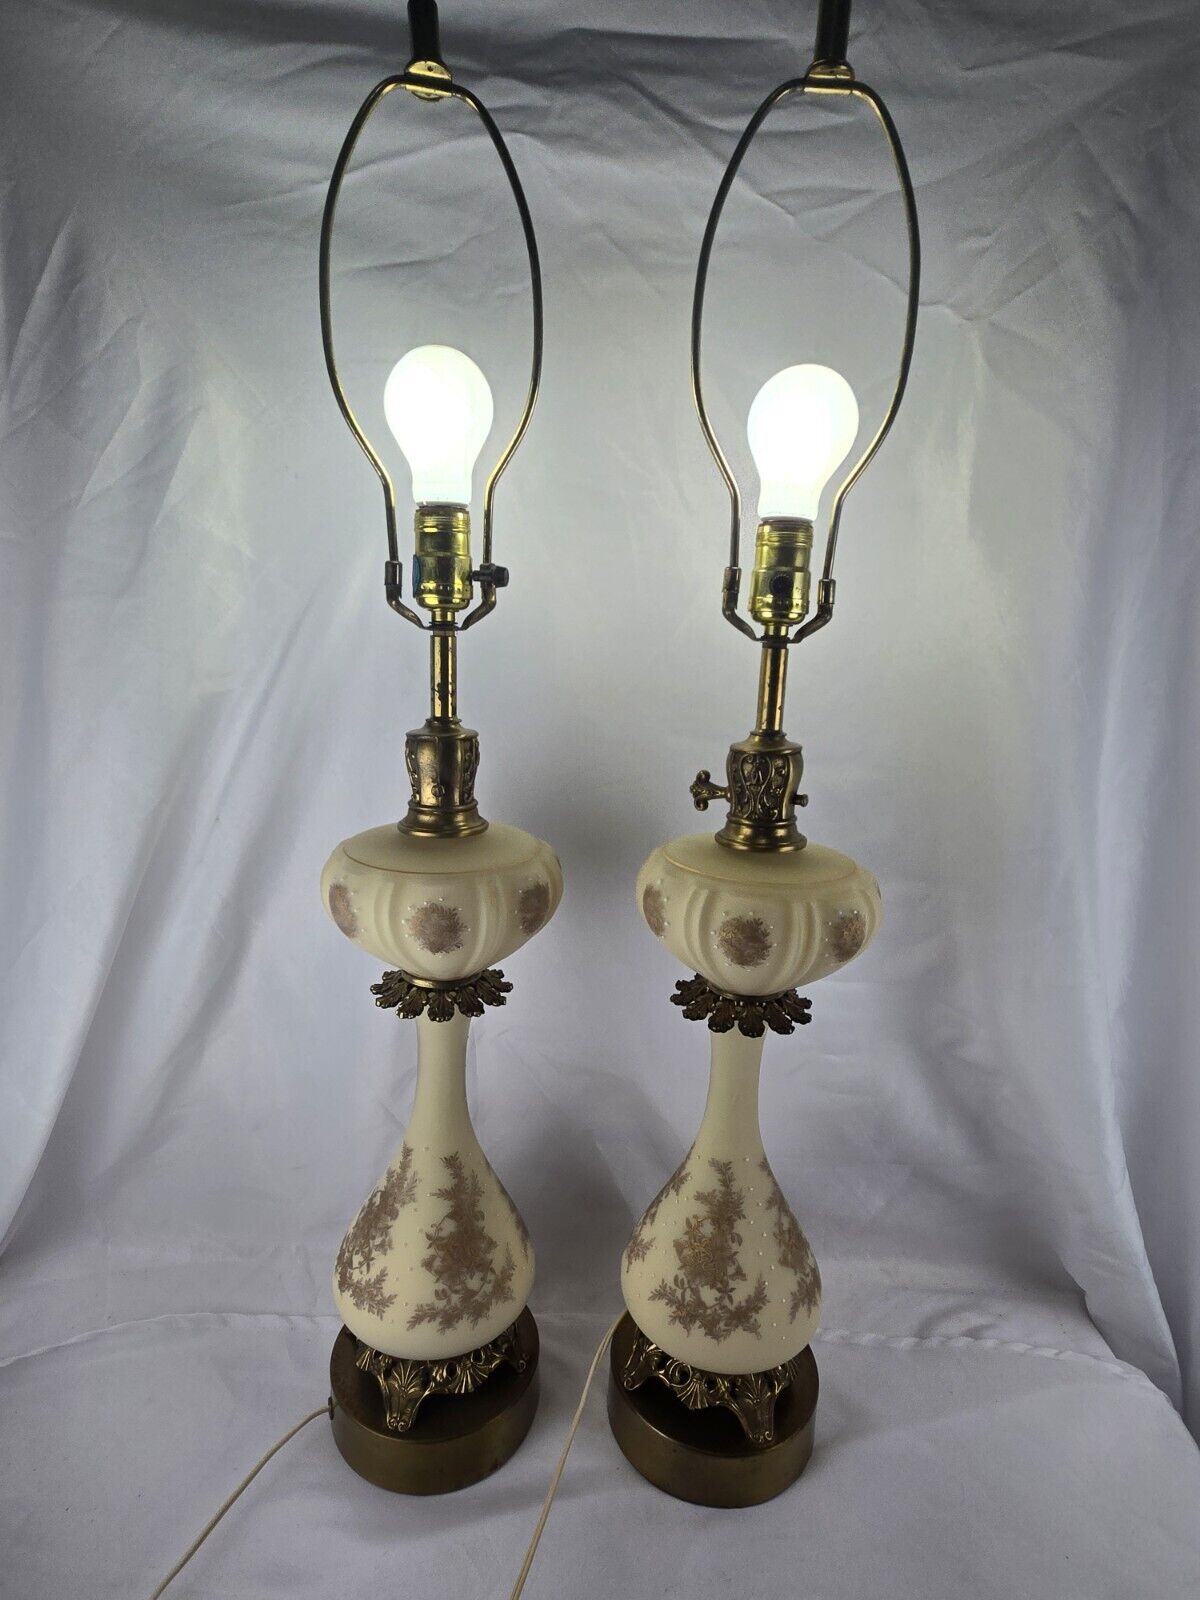 PAIR OF TALL HOLLYWOOD REGENCY ERA PINK ETCHED MILK GLASS LAMP BRONZE FEET